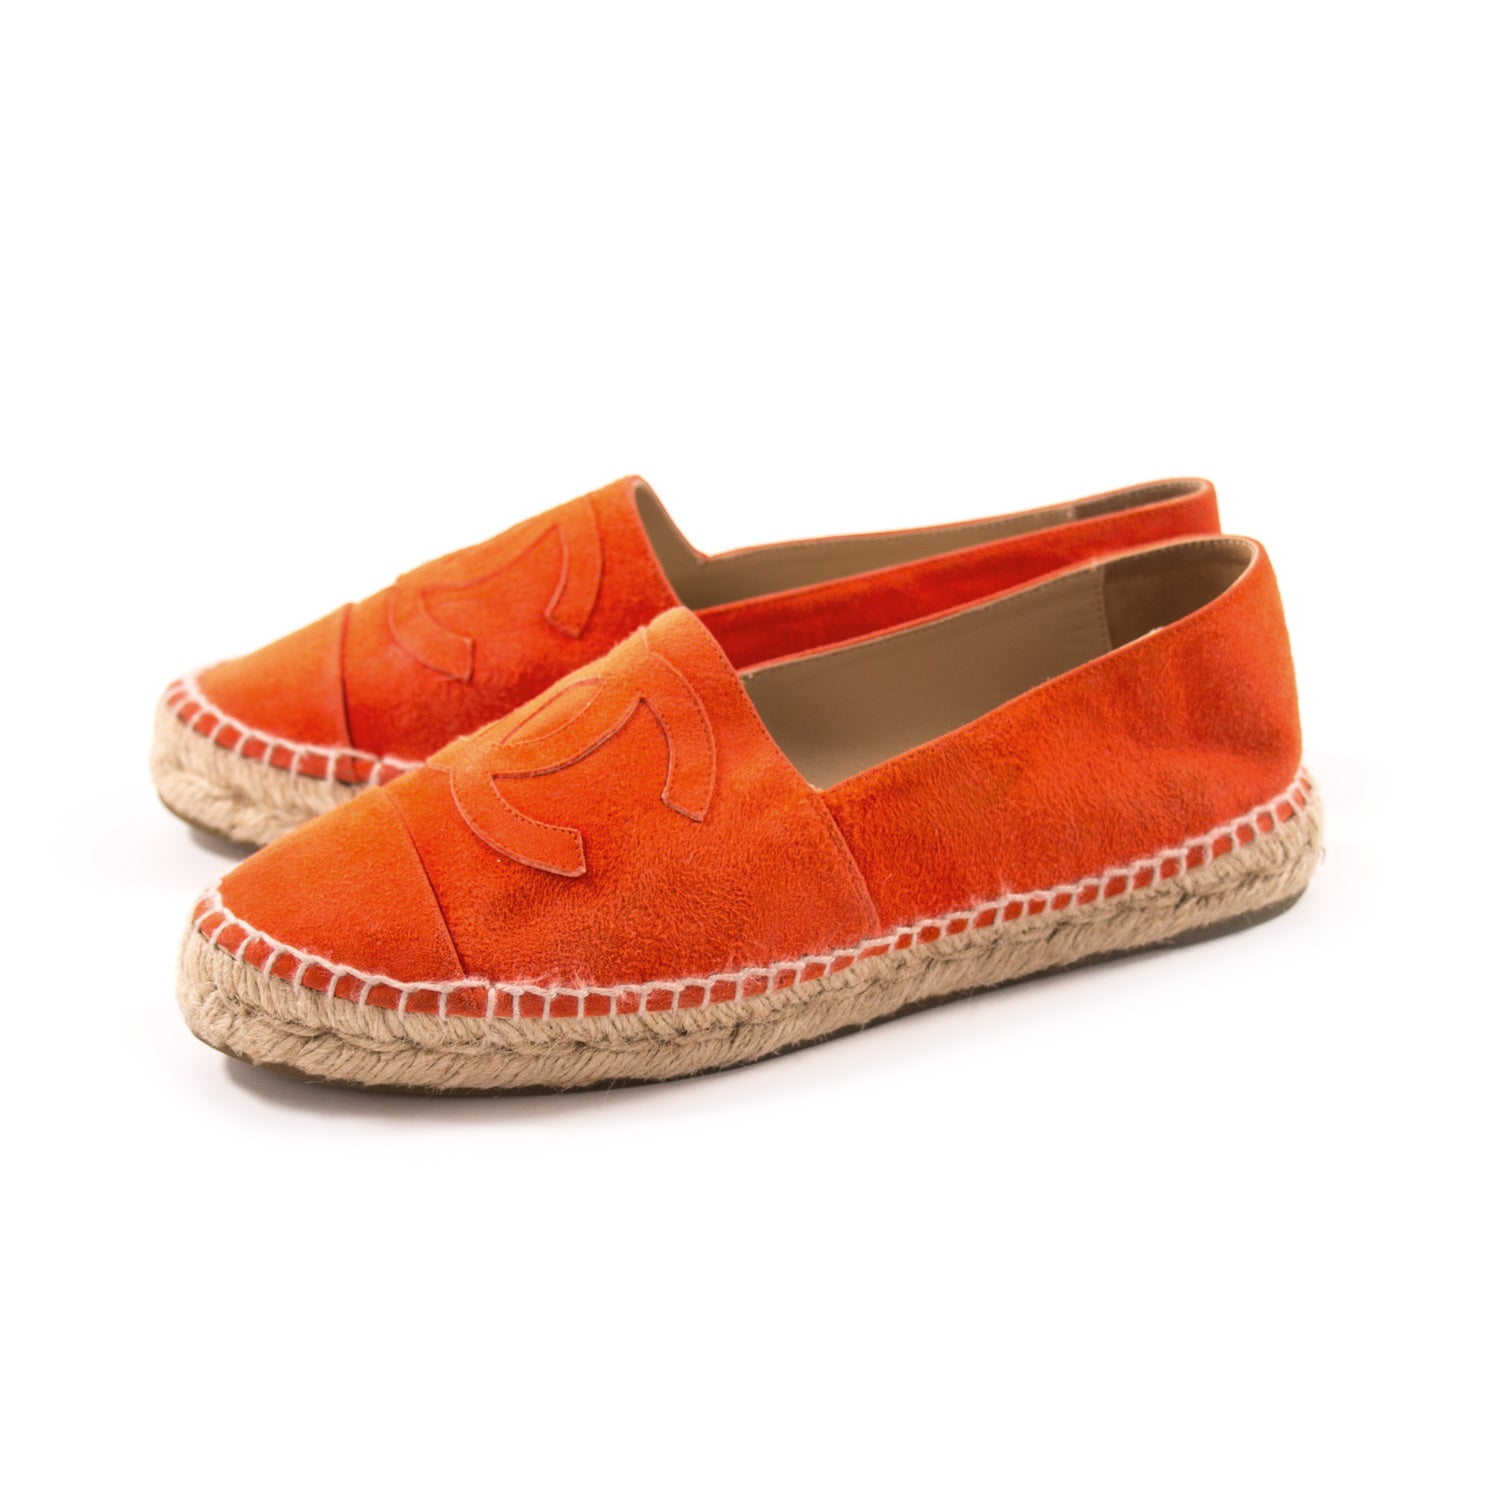 Shop authentic Chanel Red Suede Espadrilles at revogue for 500.00